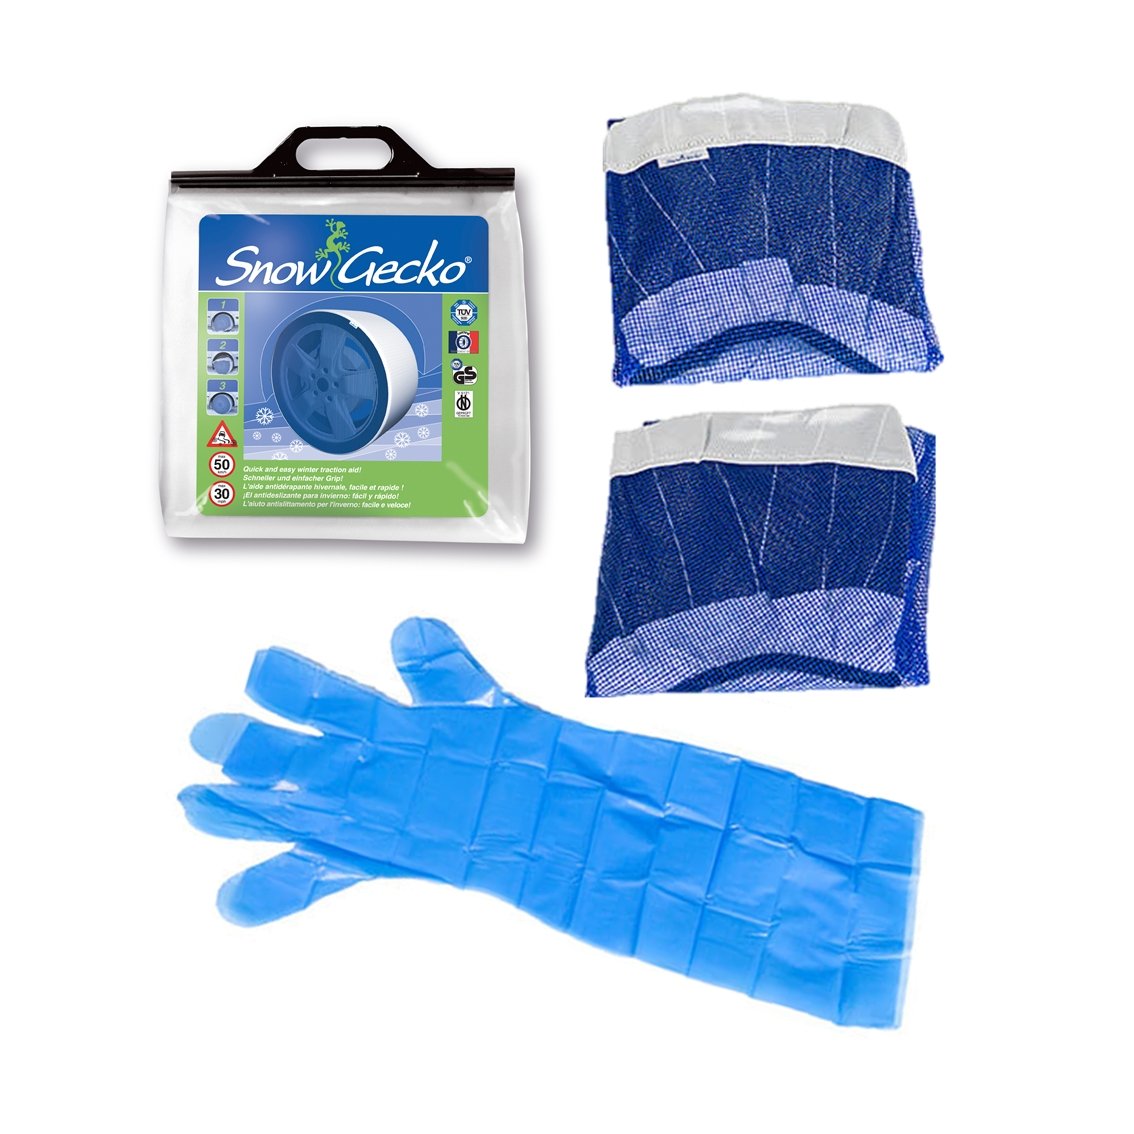 SnowGecko Large bag includes a pair of tire socks and gloves